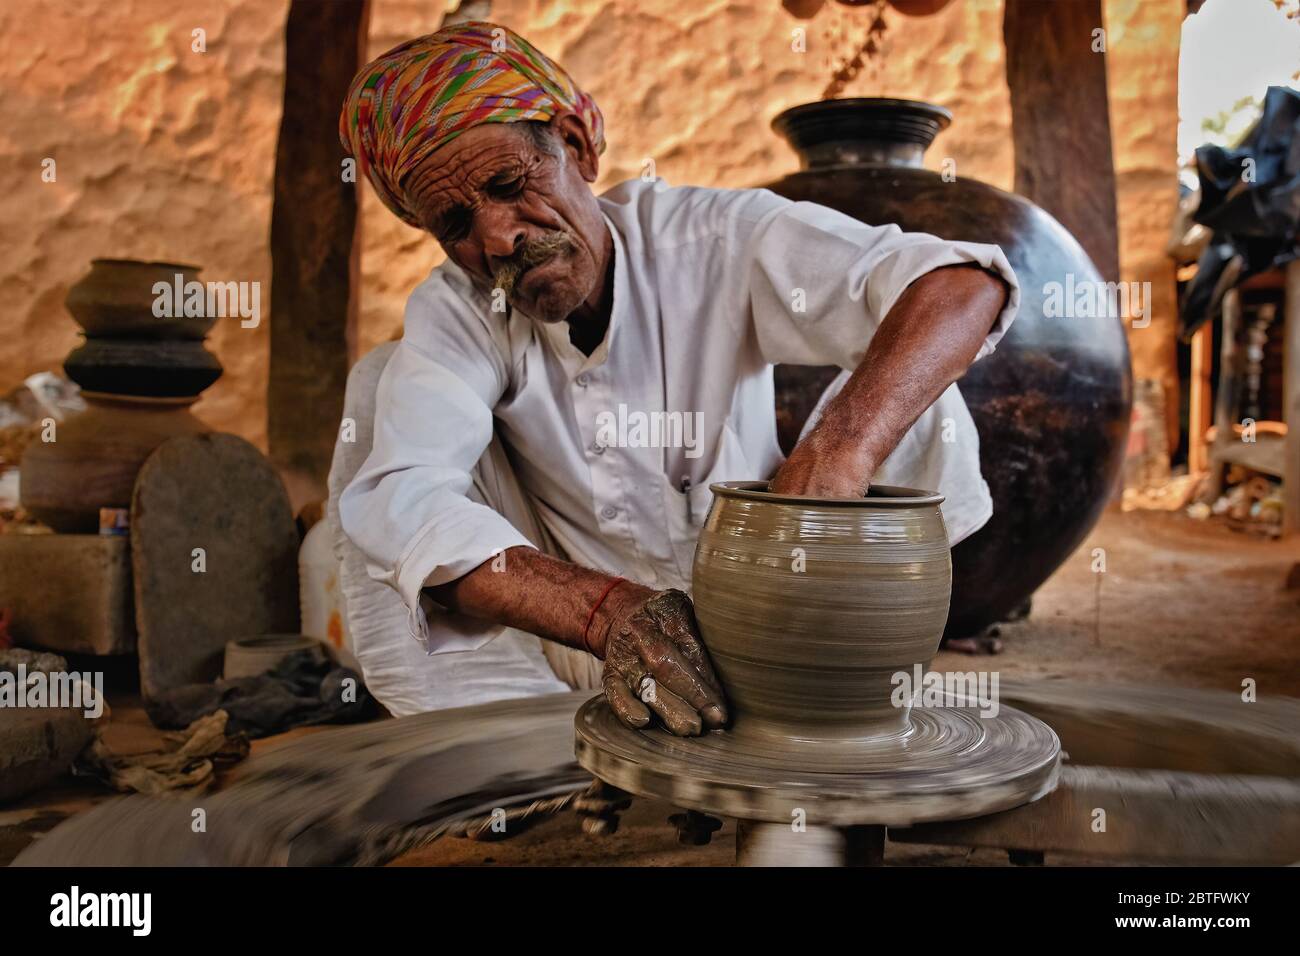 Indian potter at work. Handwork craft from Shilpagram, Udaipur, Rajasthan, India Stock Photo